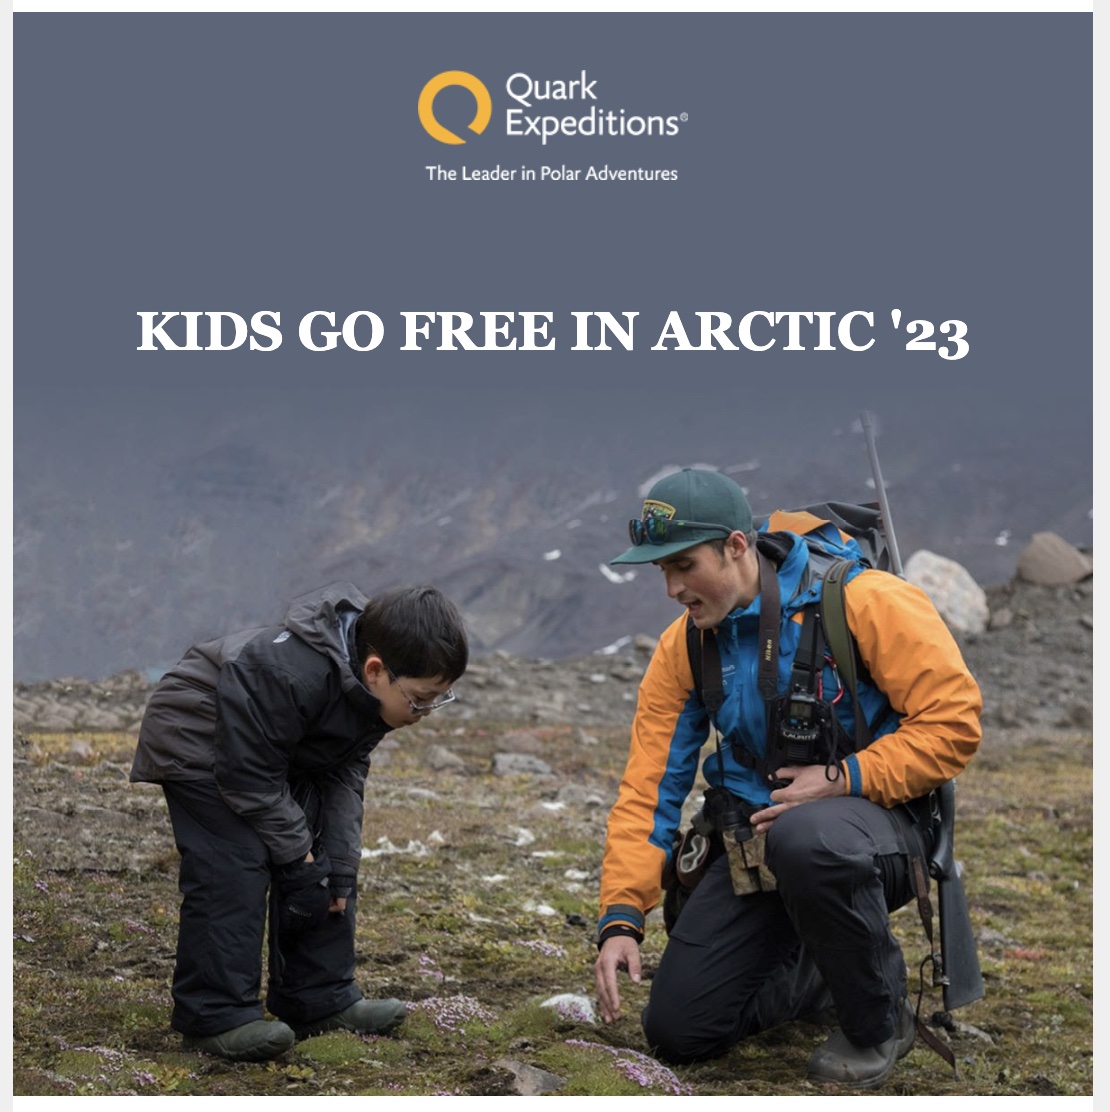 Quark Expeditions: kids travel free with their families on all Arctic 2023 voyages